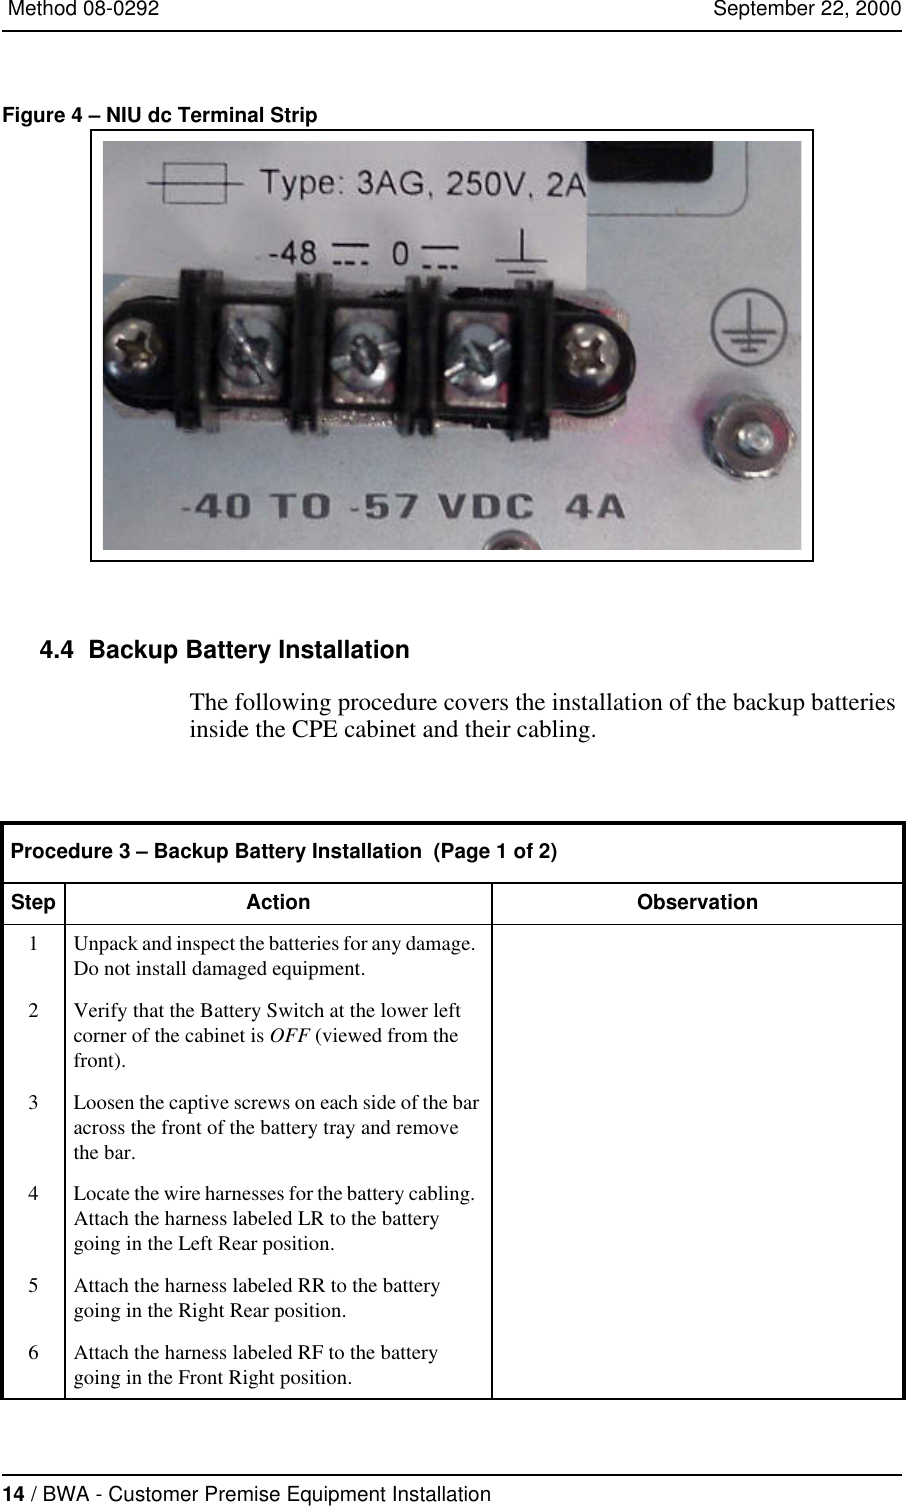 14 / BWA - Customer Premise Equipment Installation   Method 08-0292   September 22, 2000Figure 4 – NIU dc Terminal Strip  4.4  Backup Battery InstallationThe following procedure covers the installation of the backup batteries inside the CPE cabinet and their cabling.  Procedure 3 – Backup Battery Installation  (Page 1 of 2)Step Action Observation1Unpack and inspect the batteries for any damage.  Do not install damaged equipment.  2Verify that the Battery Switch at the lower left corner of the cabinet is OFF (viewed from the front).3Loosen the captive screws on each side of the bar across the front of the battery tray and remove the bar.4Locate the wire harnesses for the battery cabling.  Attach the harness labeled LR to the battery going in the Left Rear position.5Attach the harness labeled RR to the battery going in the Right Rear position.6Attach the harness labeled RF to the battery going in the Front Right position.